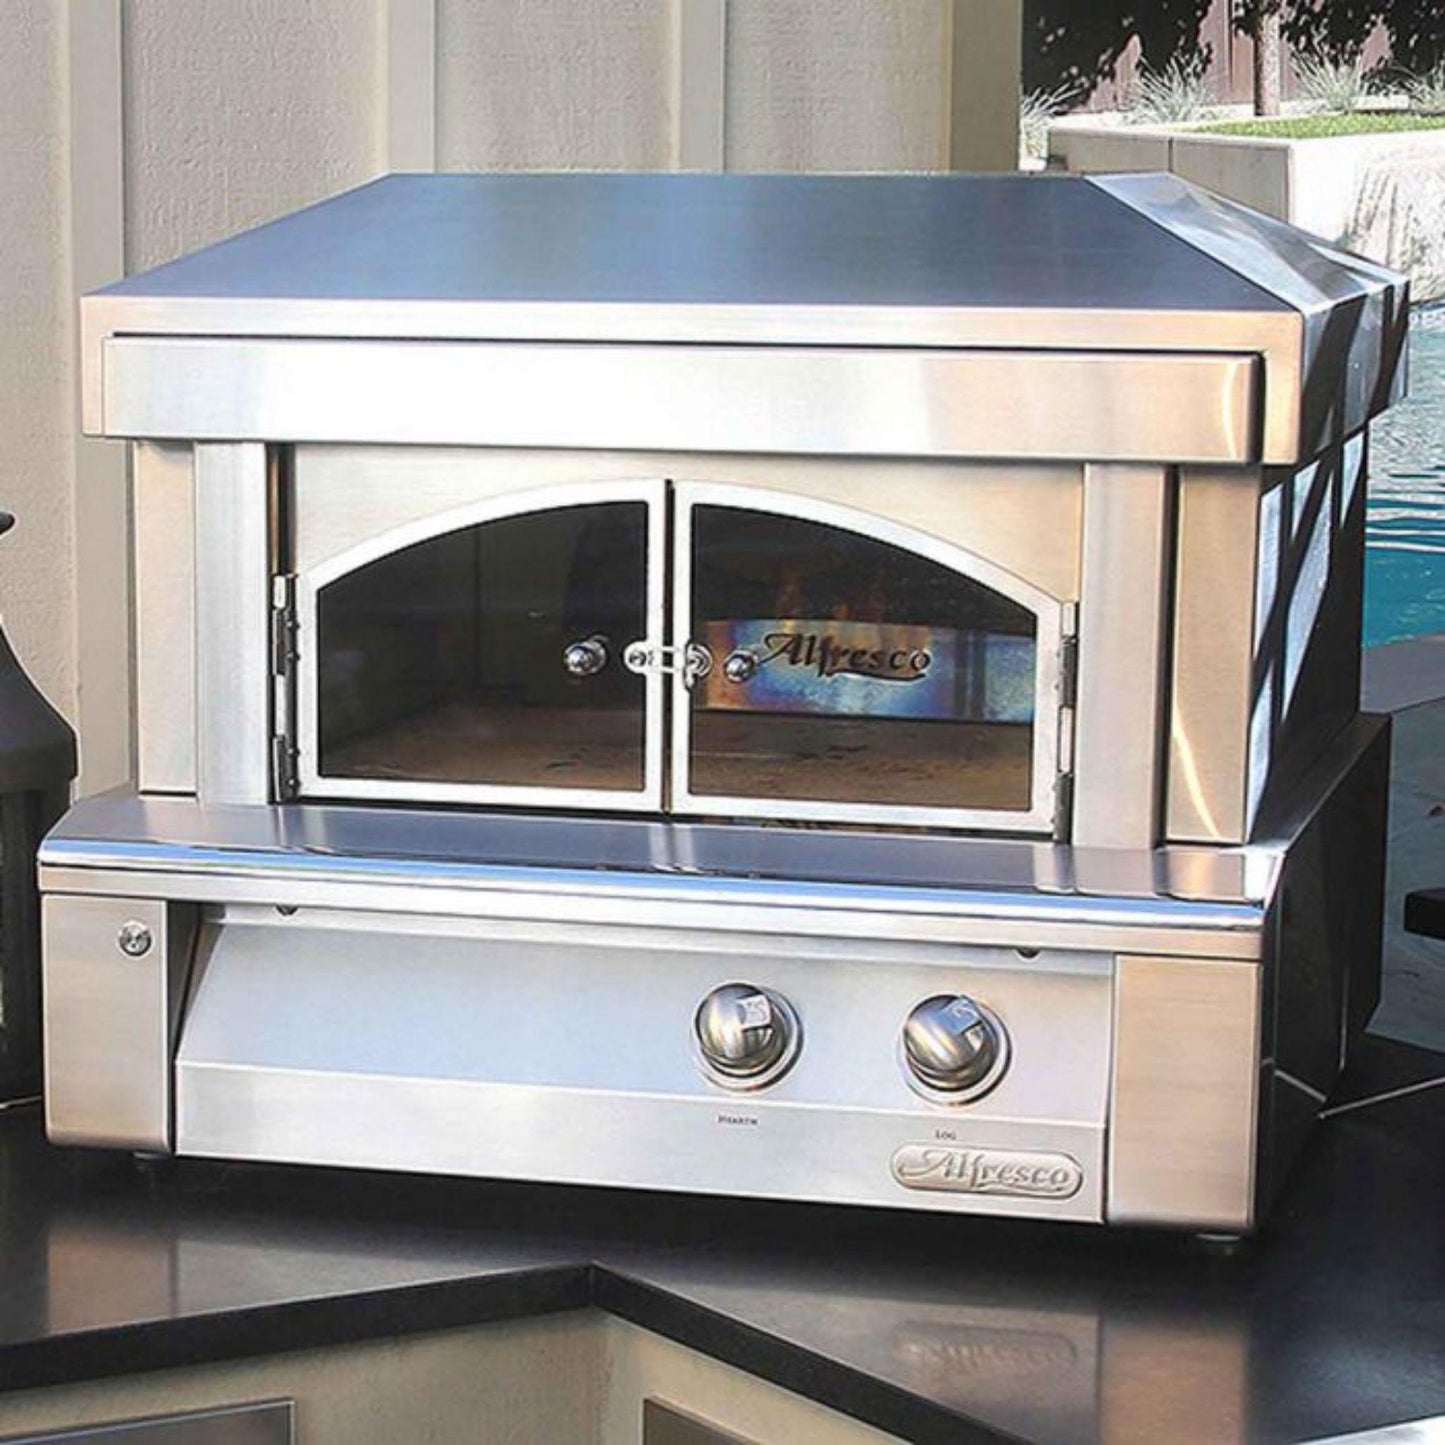 Alfresco 30" Jet Black Gloss Natural Gas Pizza Oven for Countertop Mounting